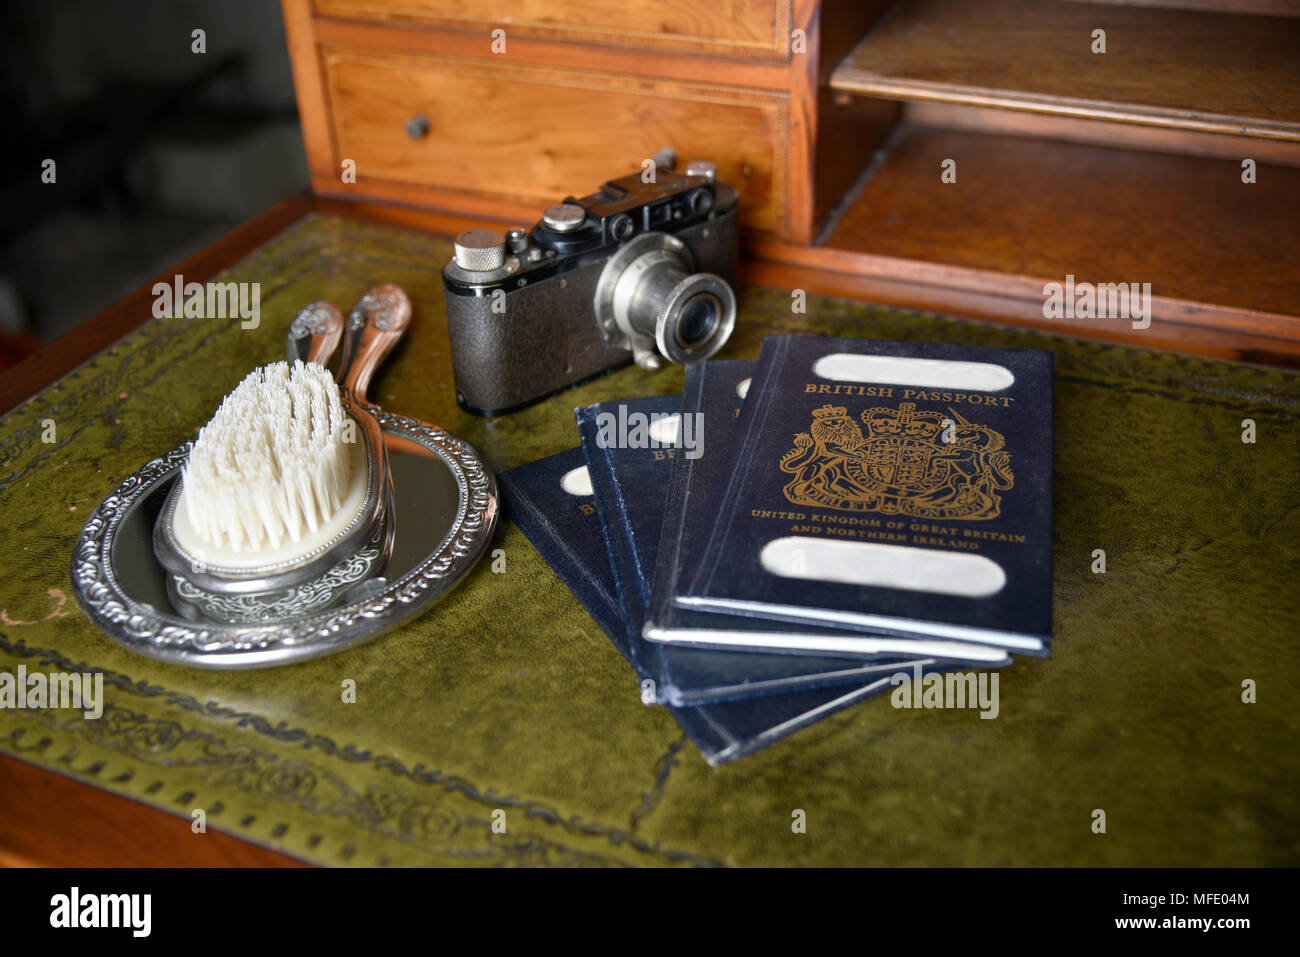 Antique Timber Desk With Passports Vintage Leica Camera And